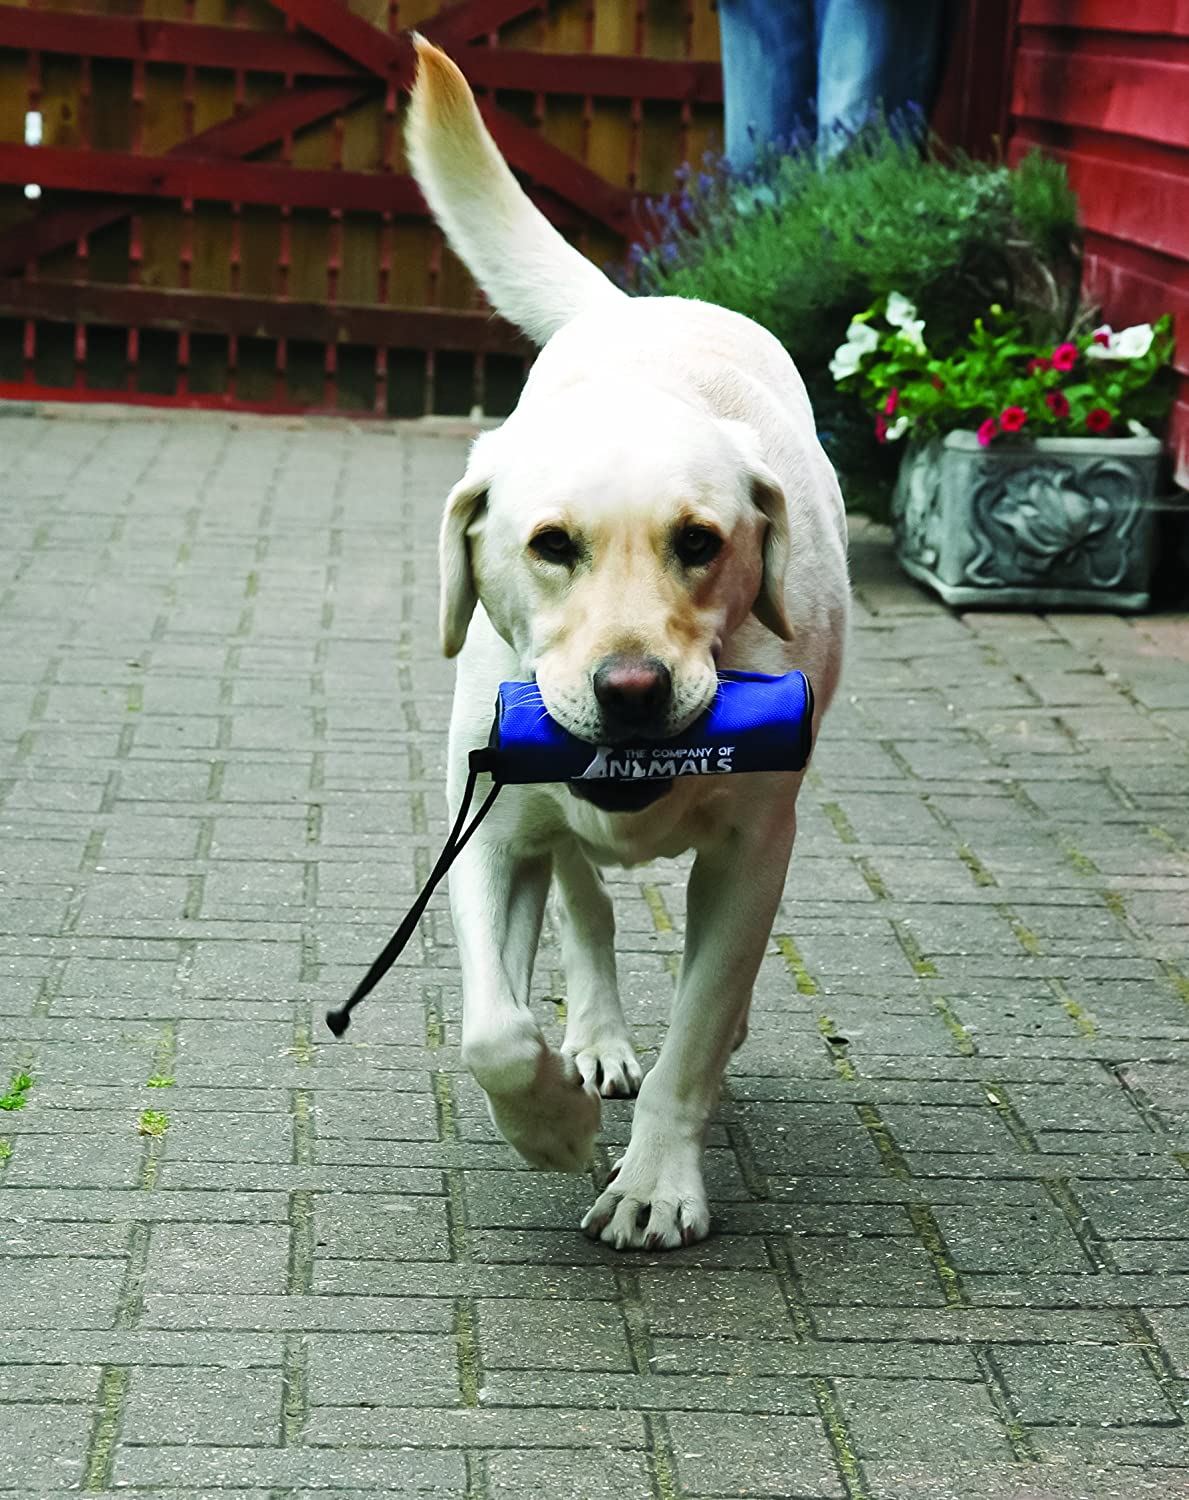 Ultimate Retiever Training Aid New Puppy Dog Recall Training Aid Accessories